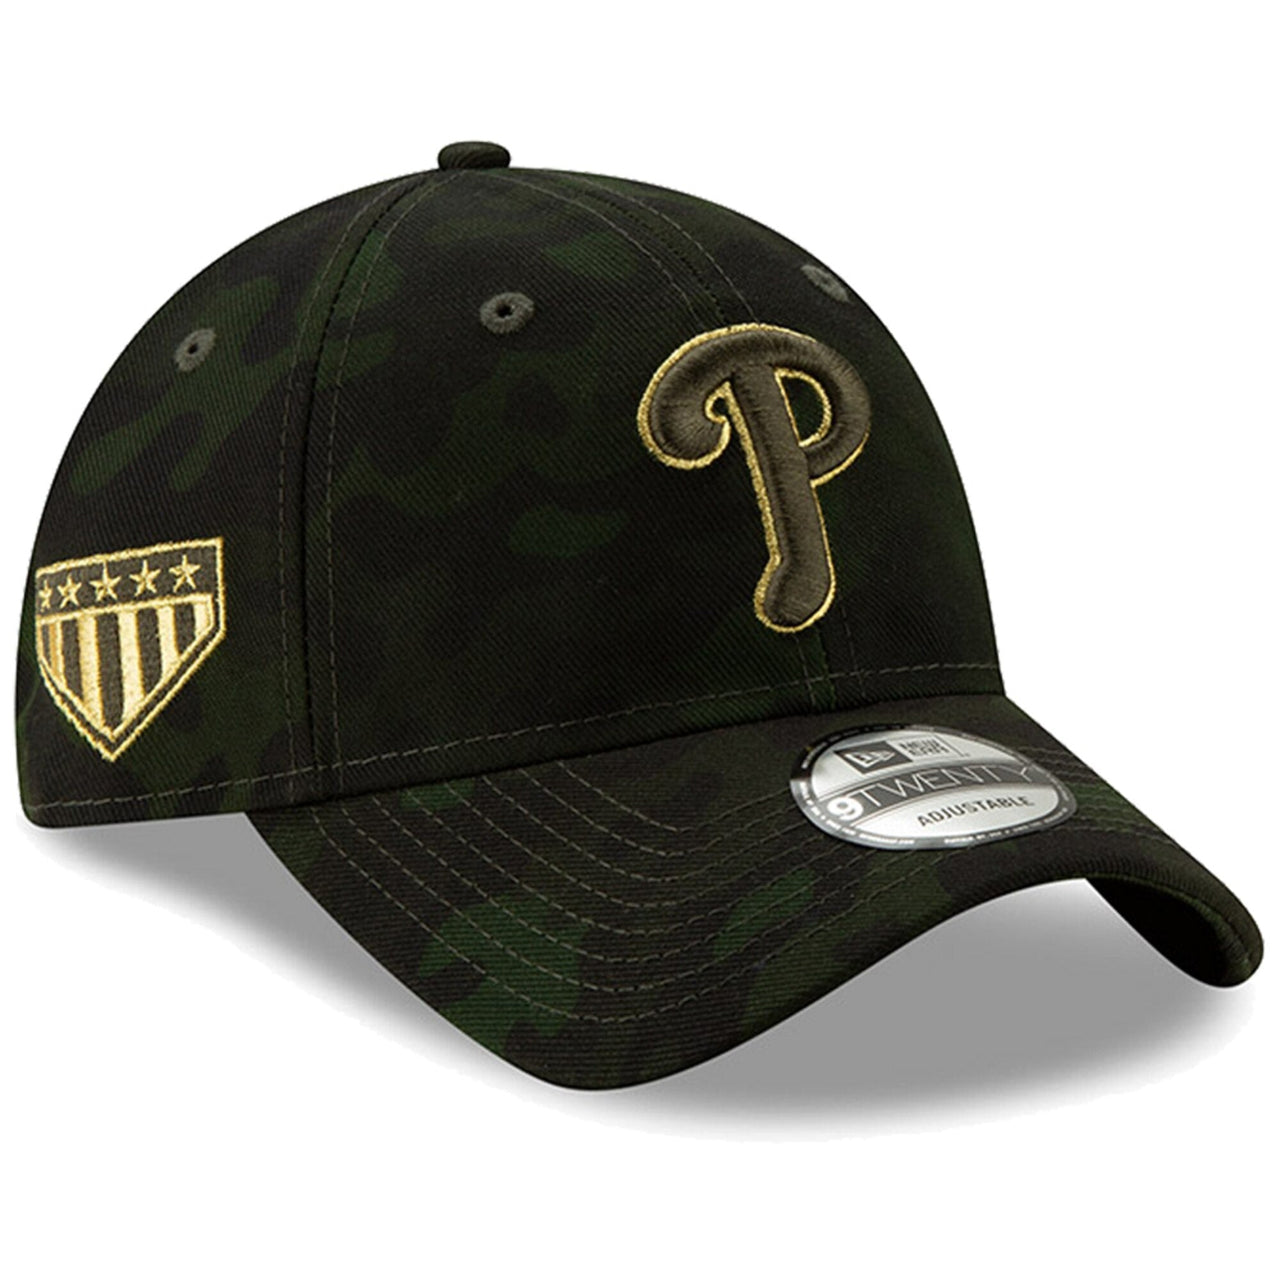 On the right side of the Philadelphia Phillies 2019 Memorial Day 9Twenty dad hat is the 5 star shield logo embroidered in gold and military green